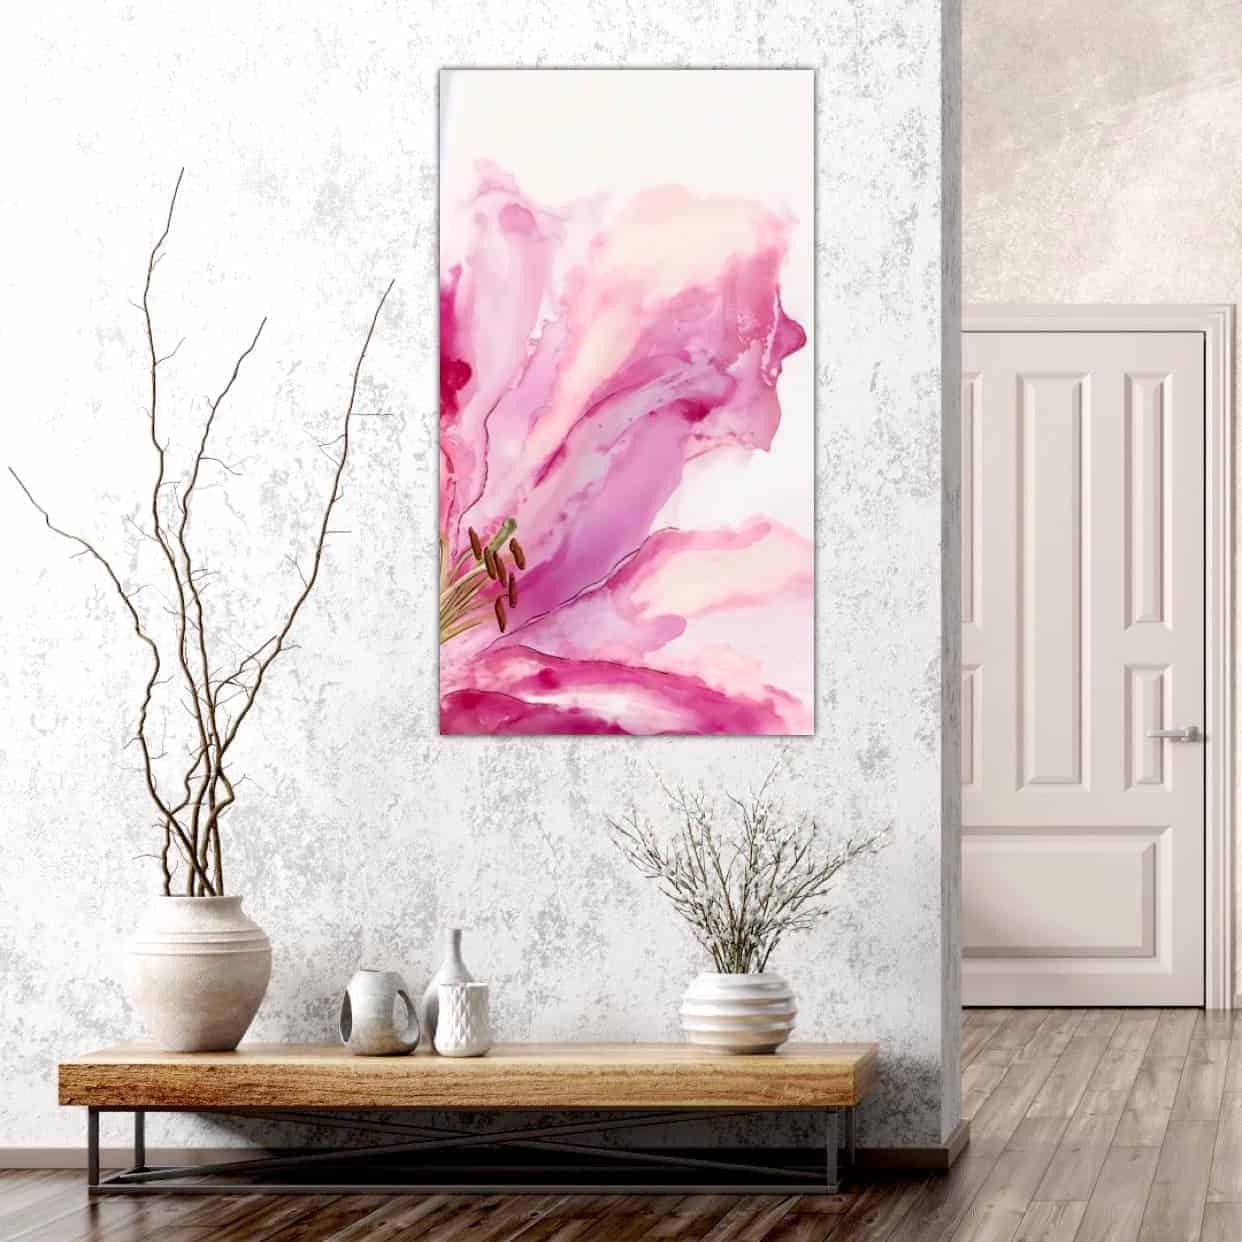 Abstract Alcohol Ink Painting of Lily Hanging on Wall in Home